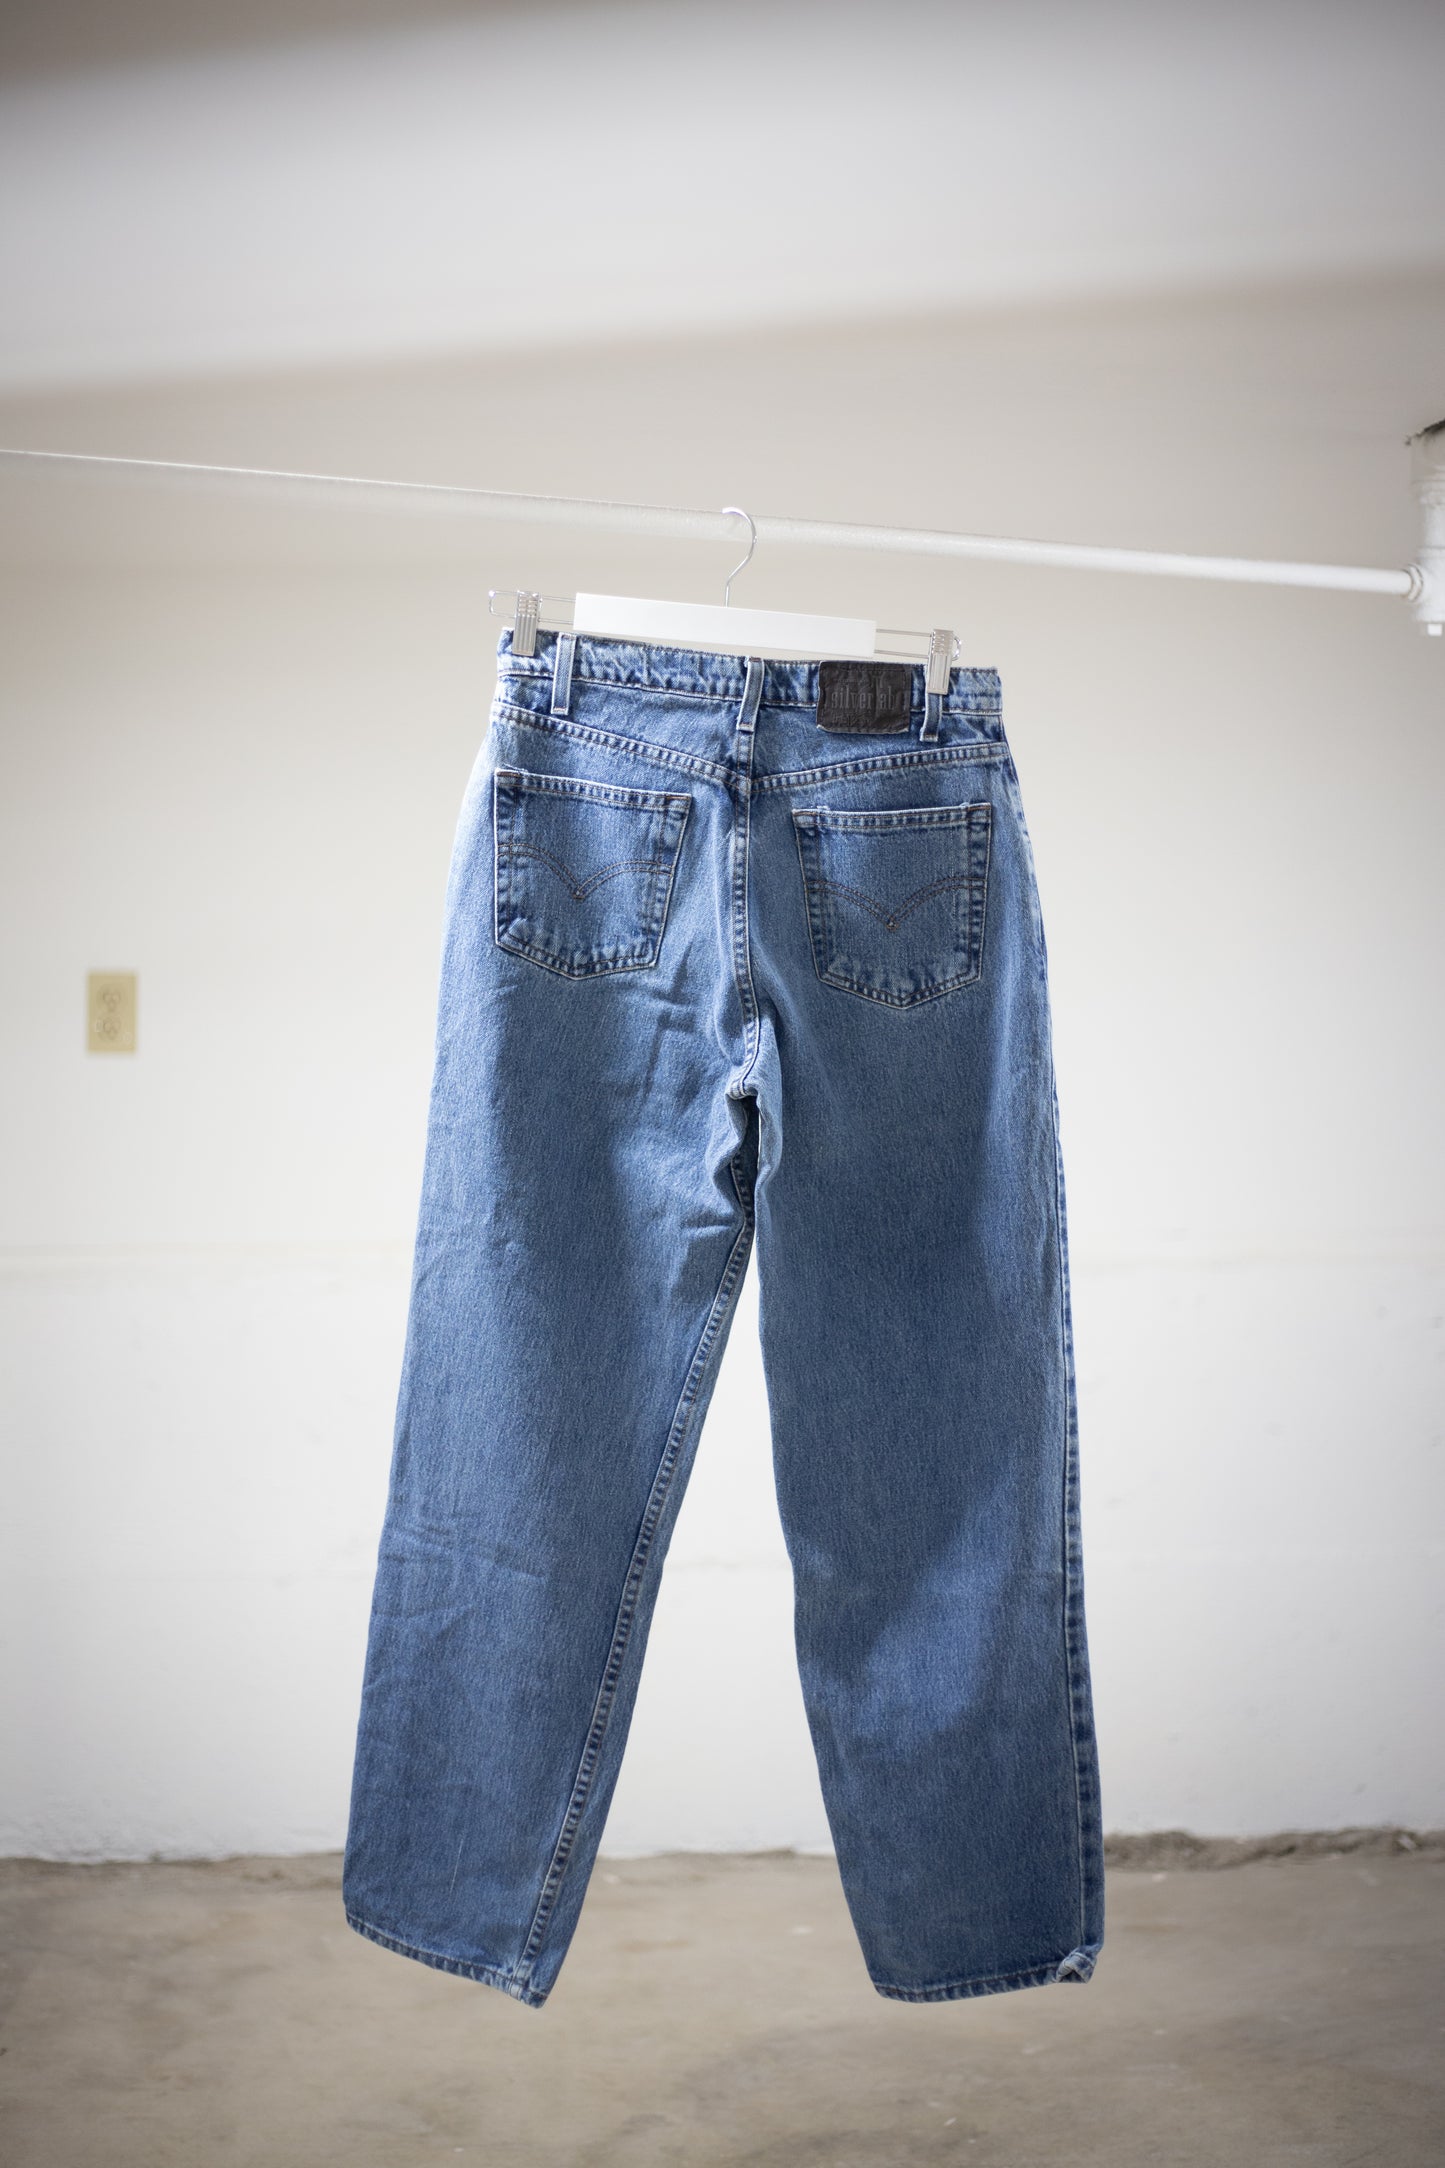 90's Levi's SilverTab (977 0797) Loose Jeans